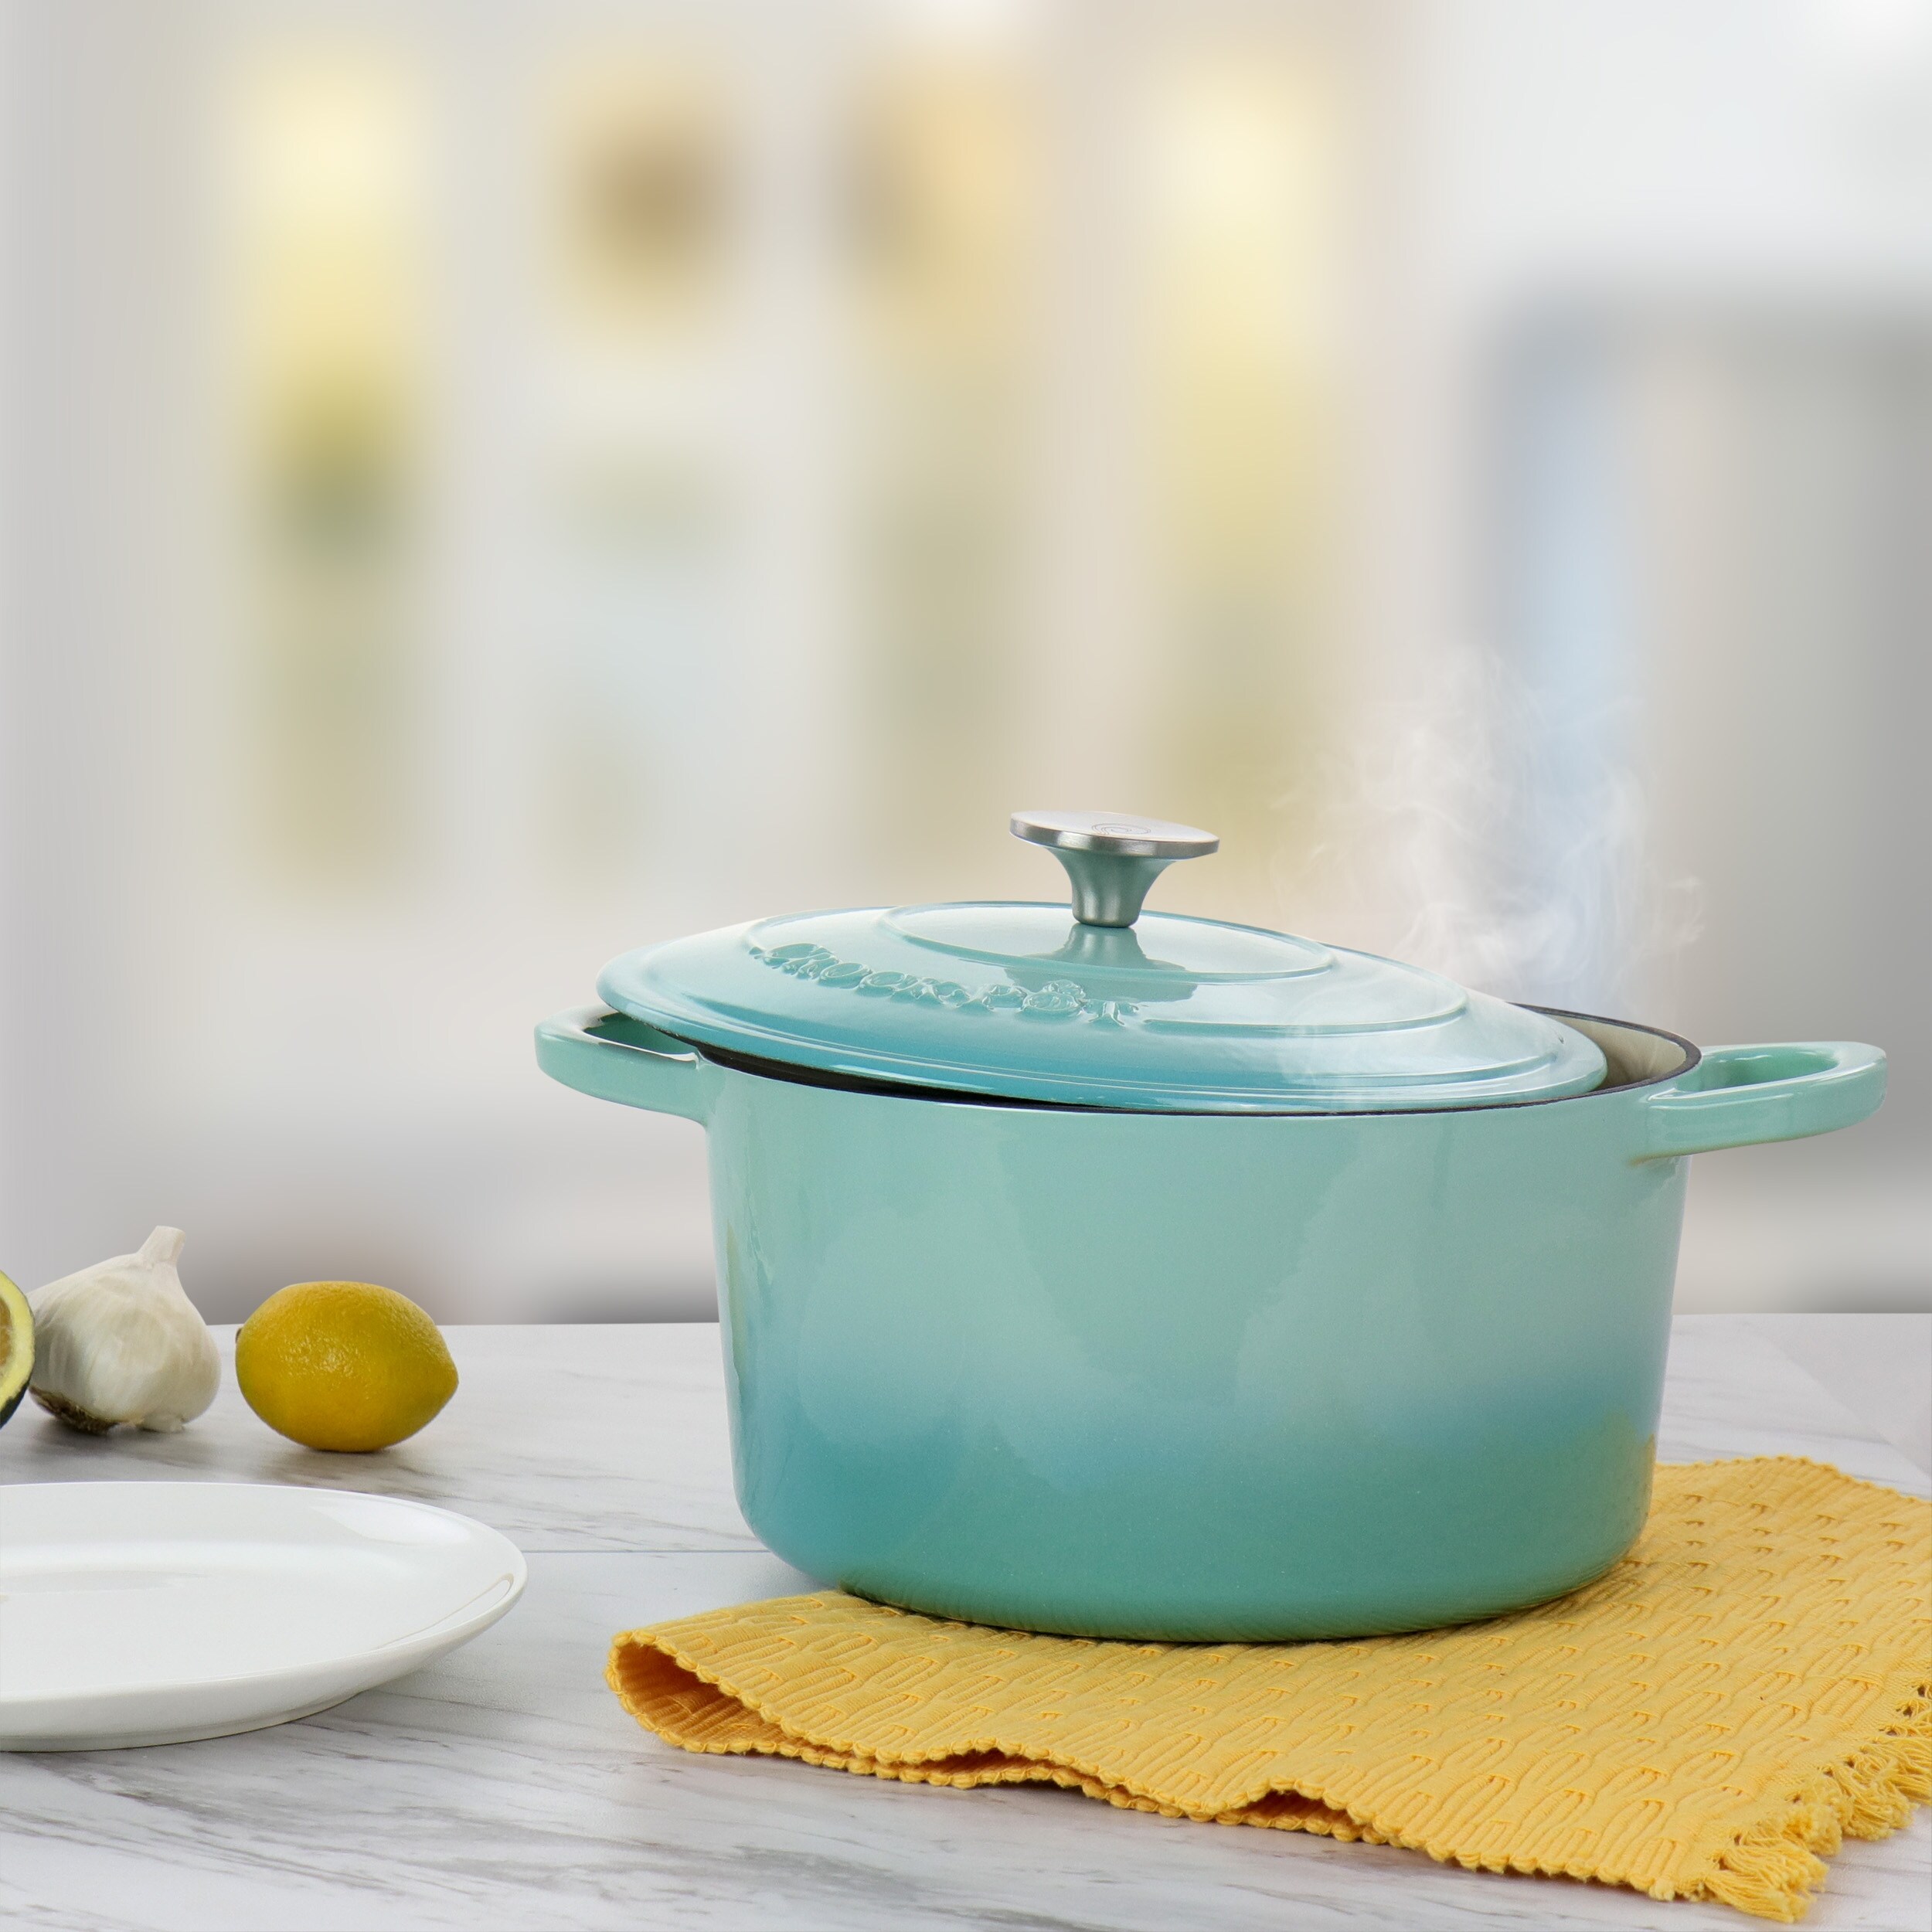 https://ak1.ostkcdn.com/images/products/is/images/direct/cab1eccc9947b6fb1150a46047386b68f338e620/5-Quarts-Enameled-Cast-Iron-Dutch-Oven-in-Light-Teal.jpg